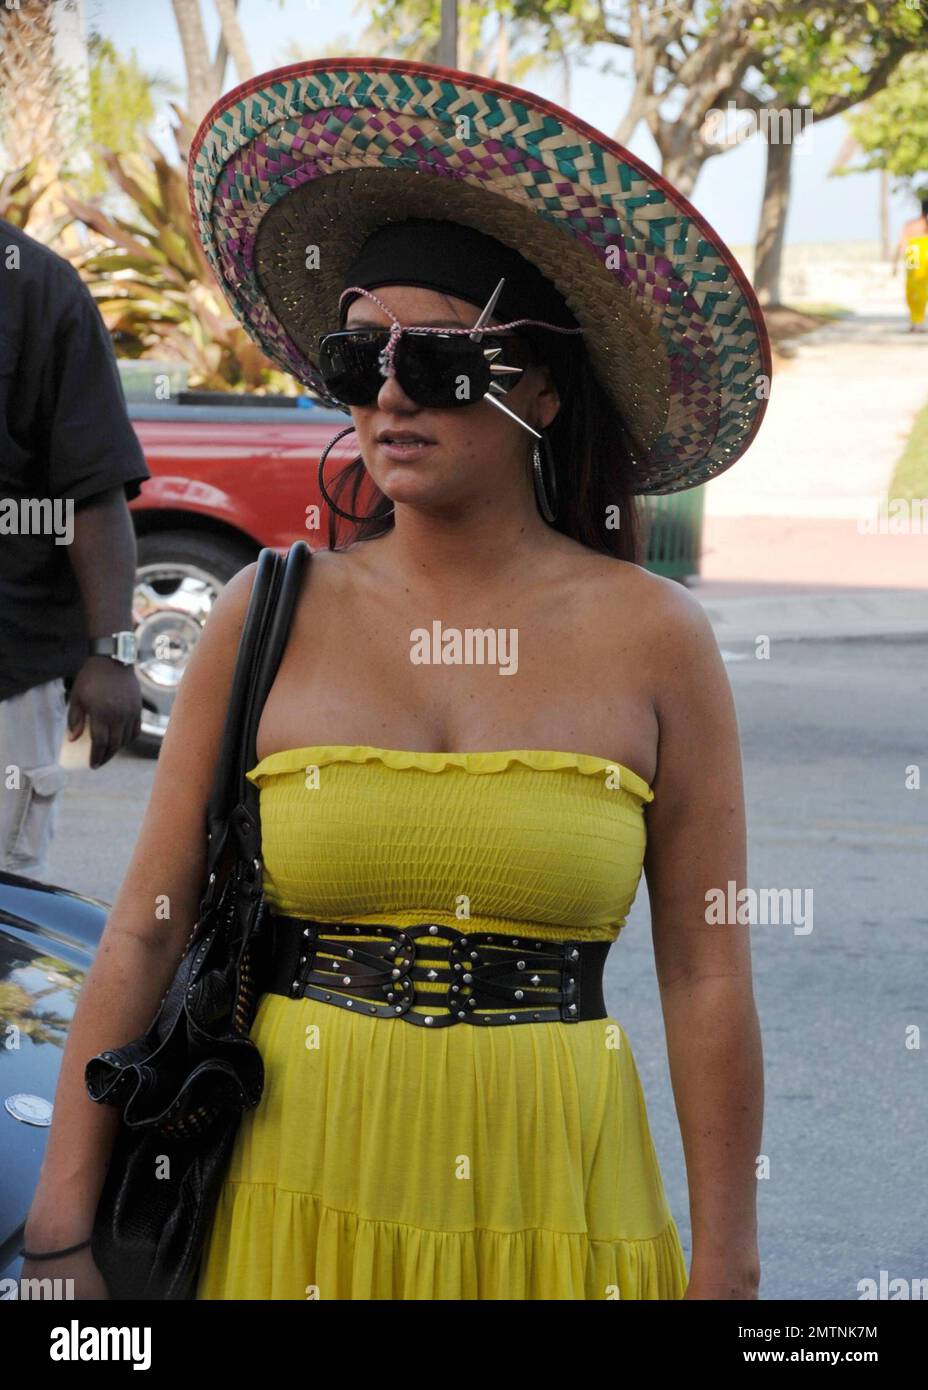 Nicole "Snooki" Polizzi and Jenni "J-Woww" Farley have a wild day  celebrating Cinco de Mayo with sombreros, margaritas and Corona while  filming an episode of "Jersey Shore" in Miami Beach, FL. 5/5/10